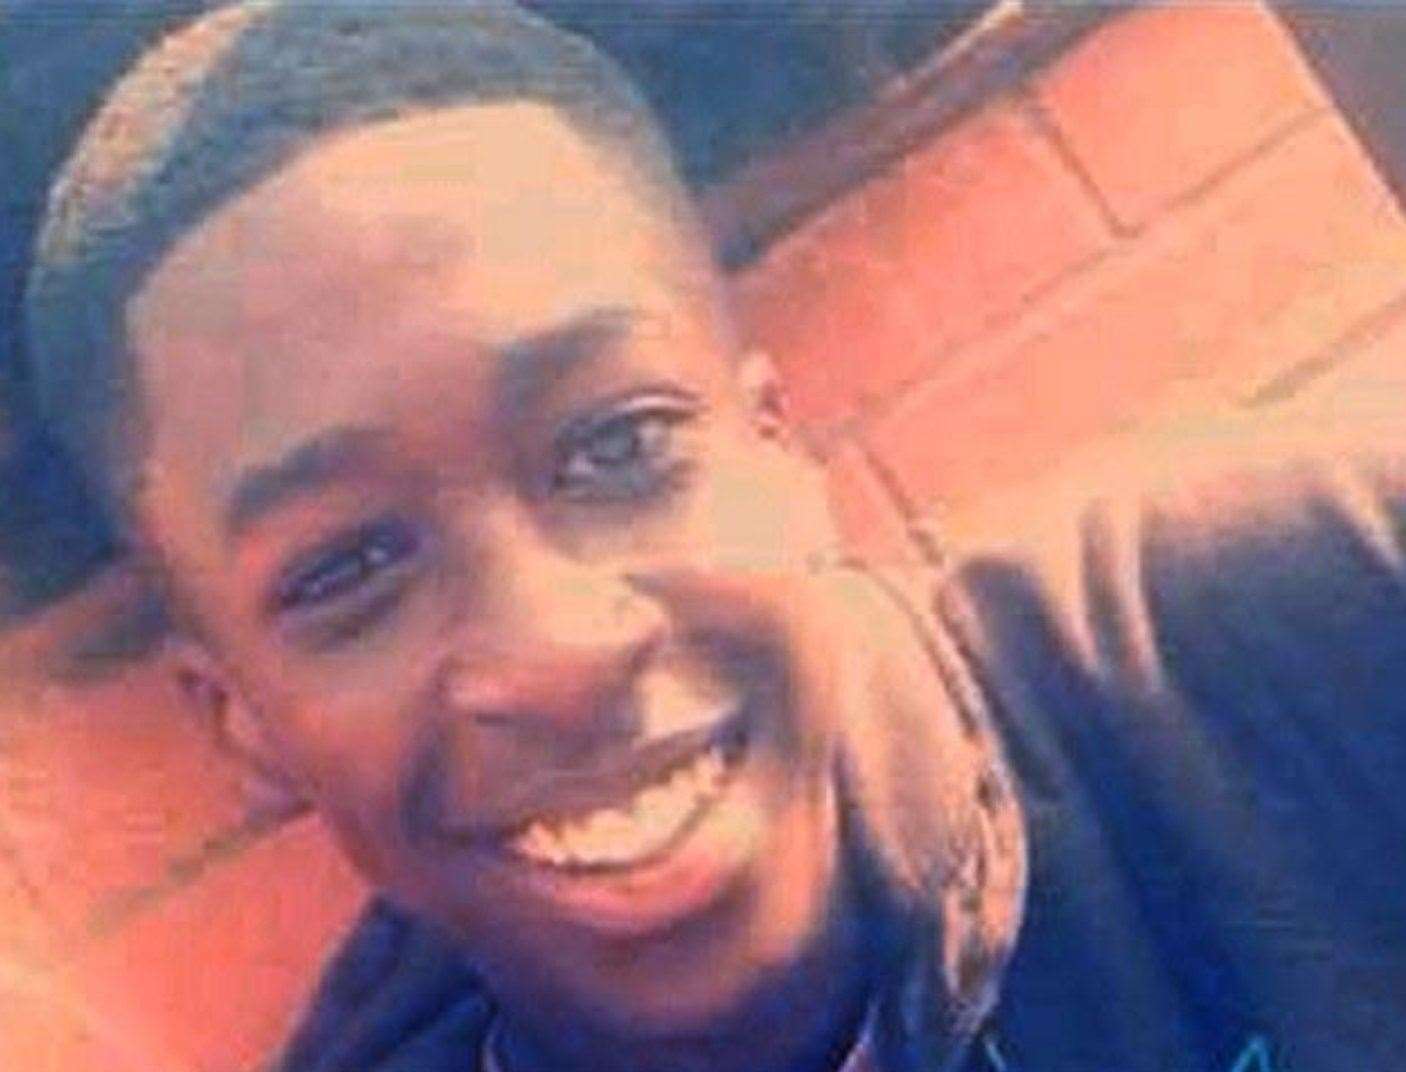 An inquest into Jaydon McFarlane's death has been opened